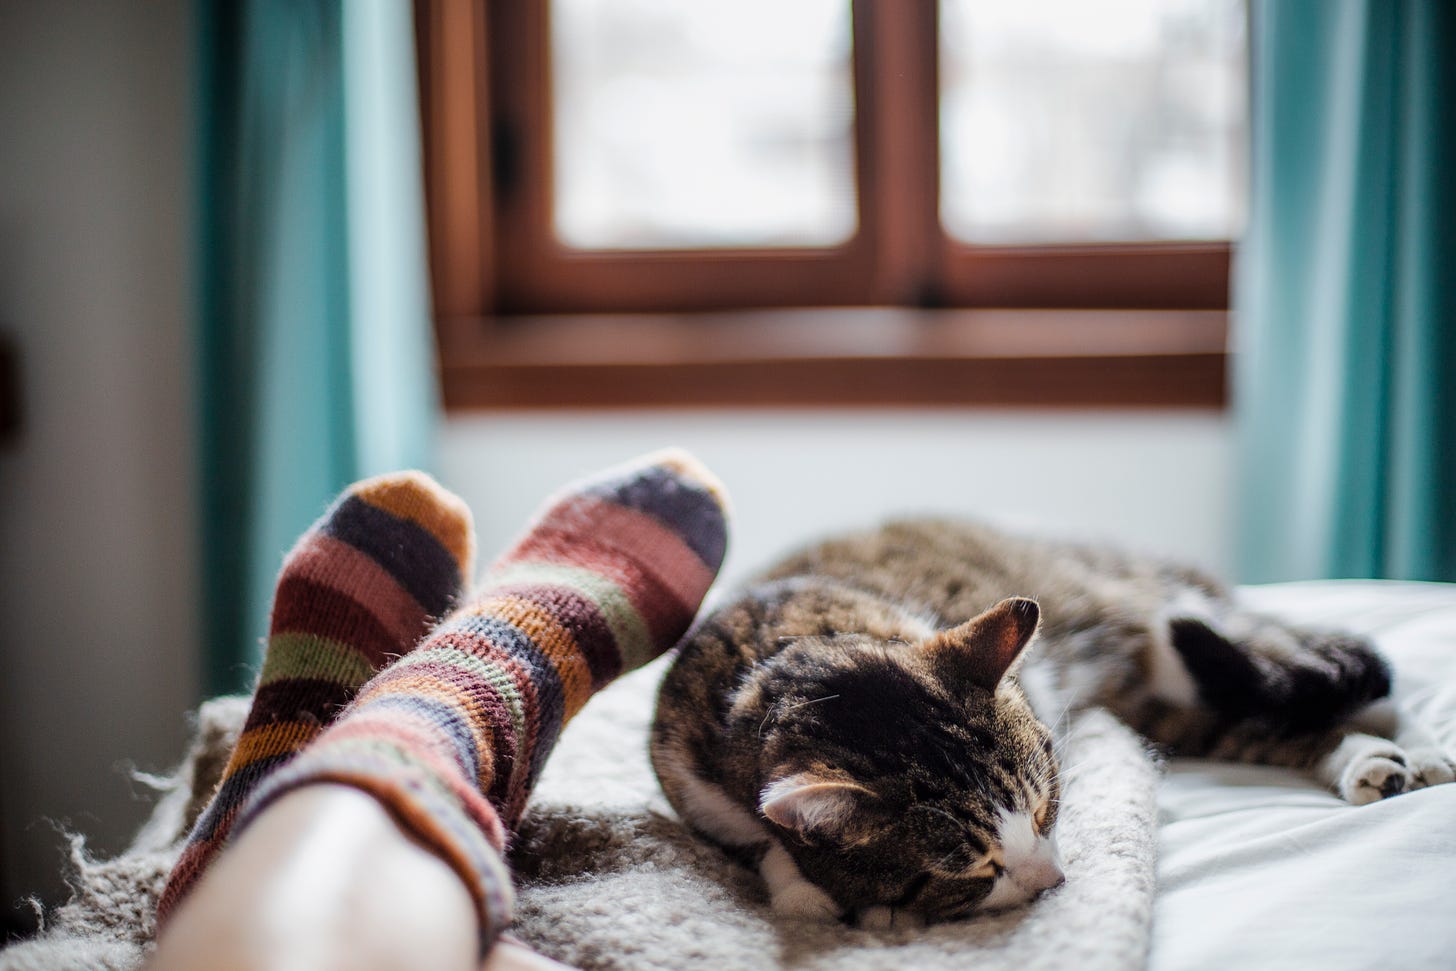 Sock covered feet, prone on a bed next to a brown striped cat